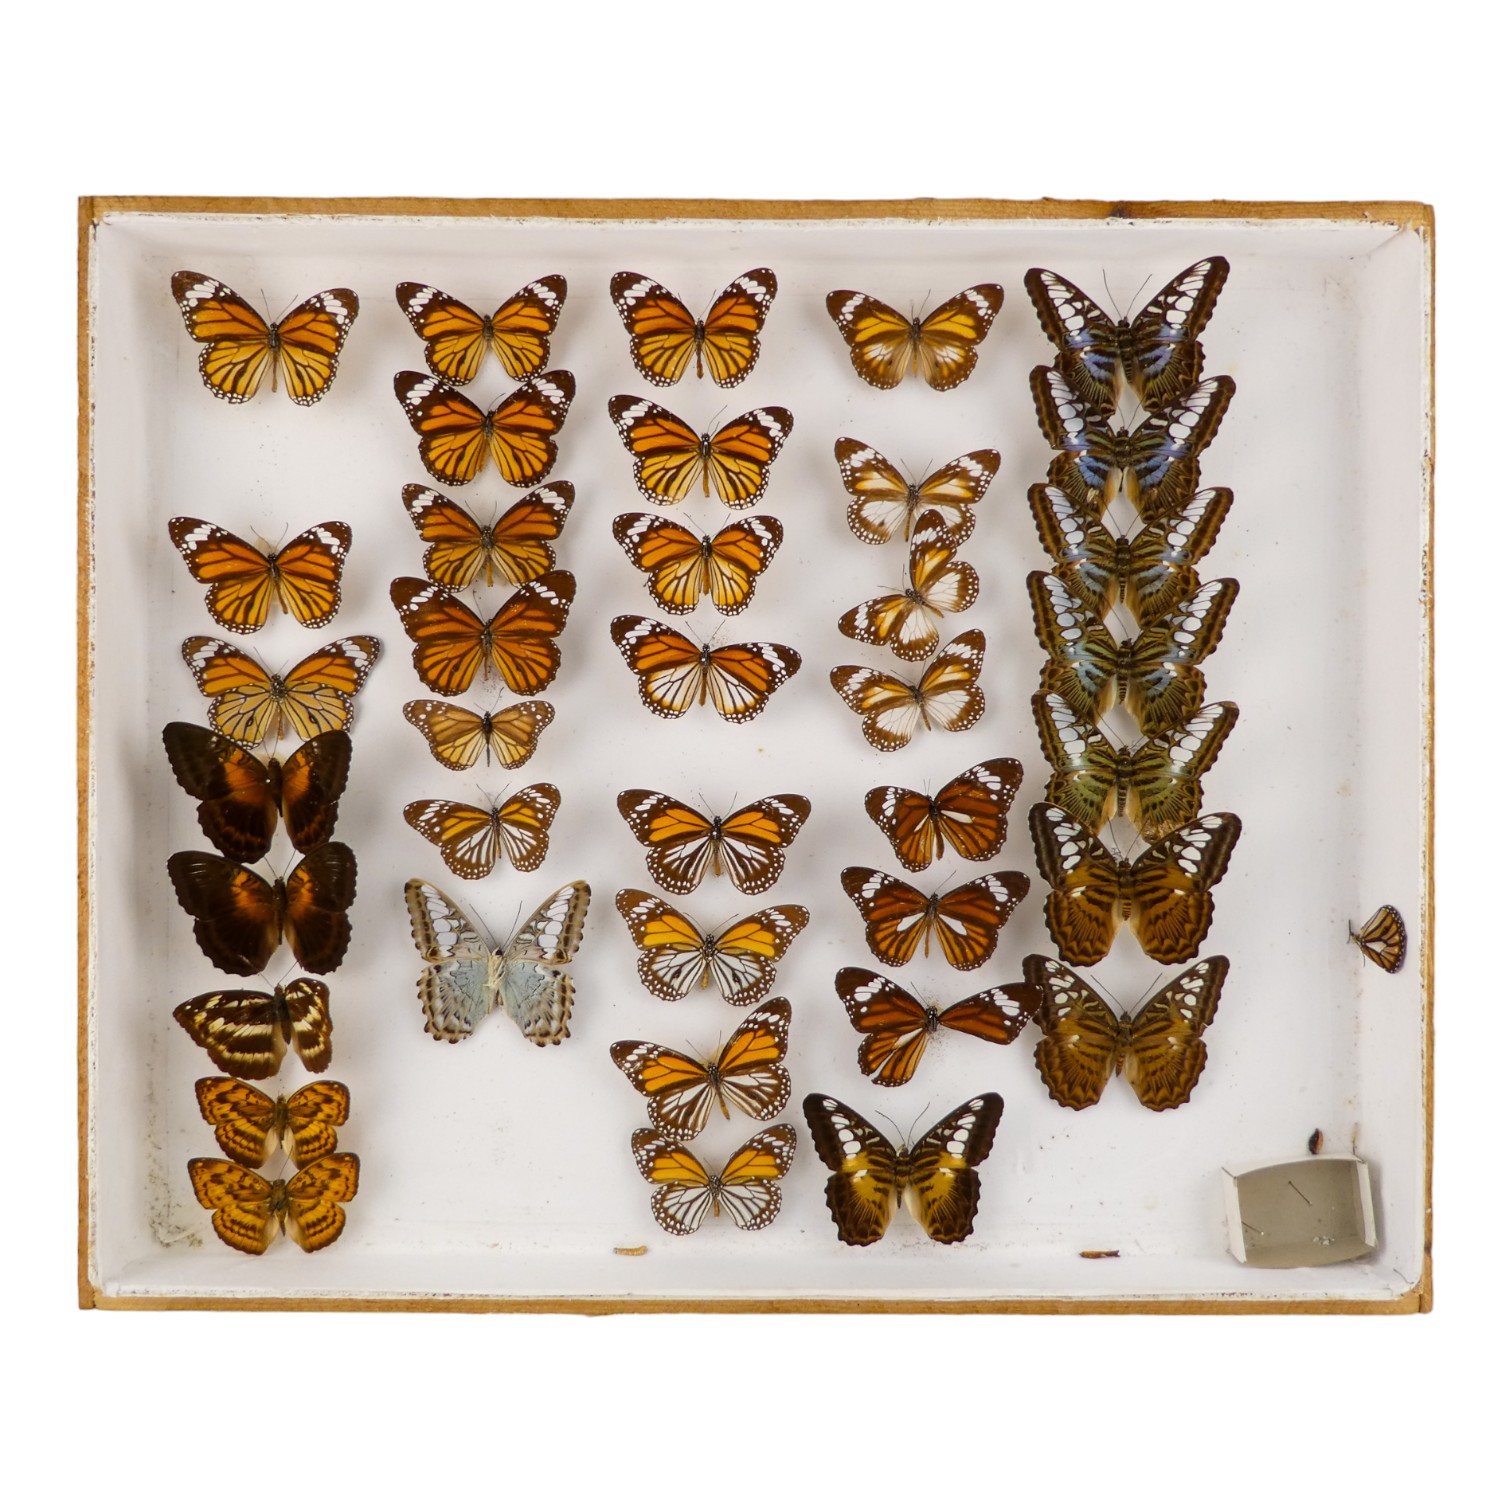 A case of butterflies in five rows - including Clipper, Monarch and Cassiope Owlet